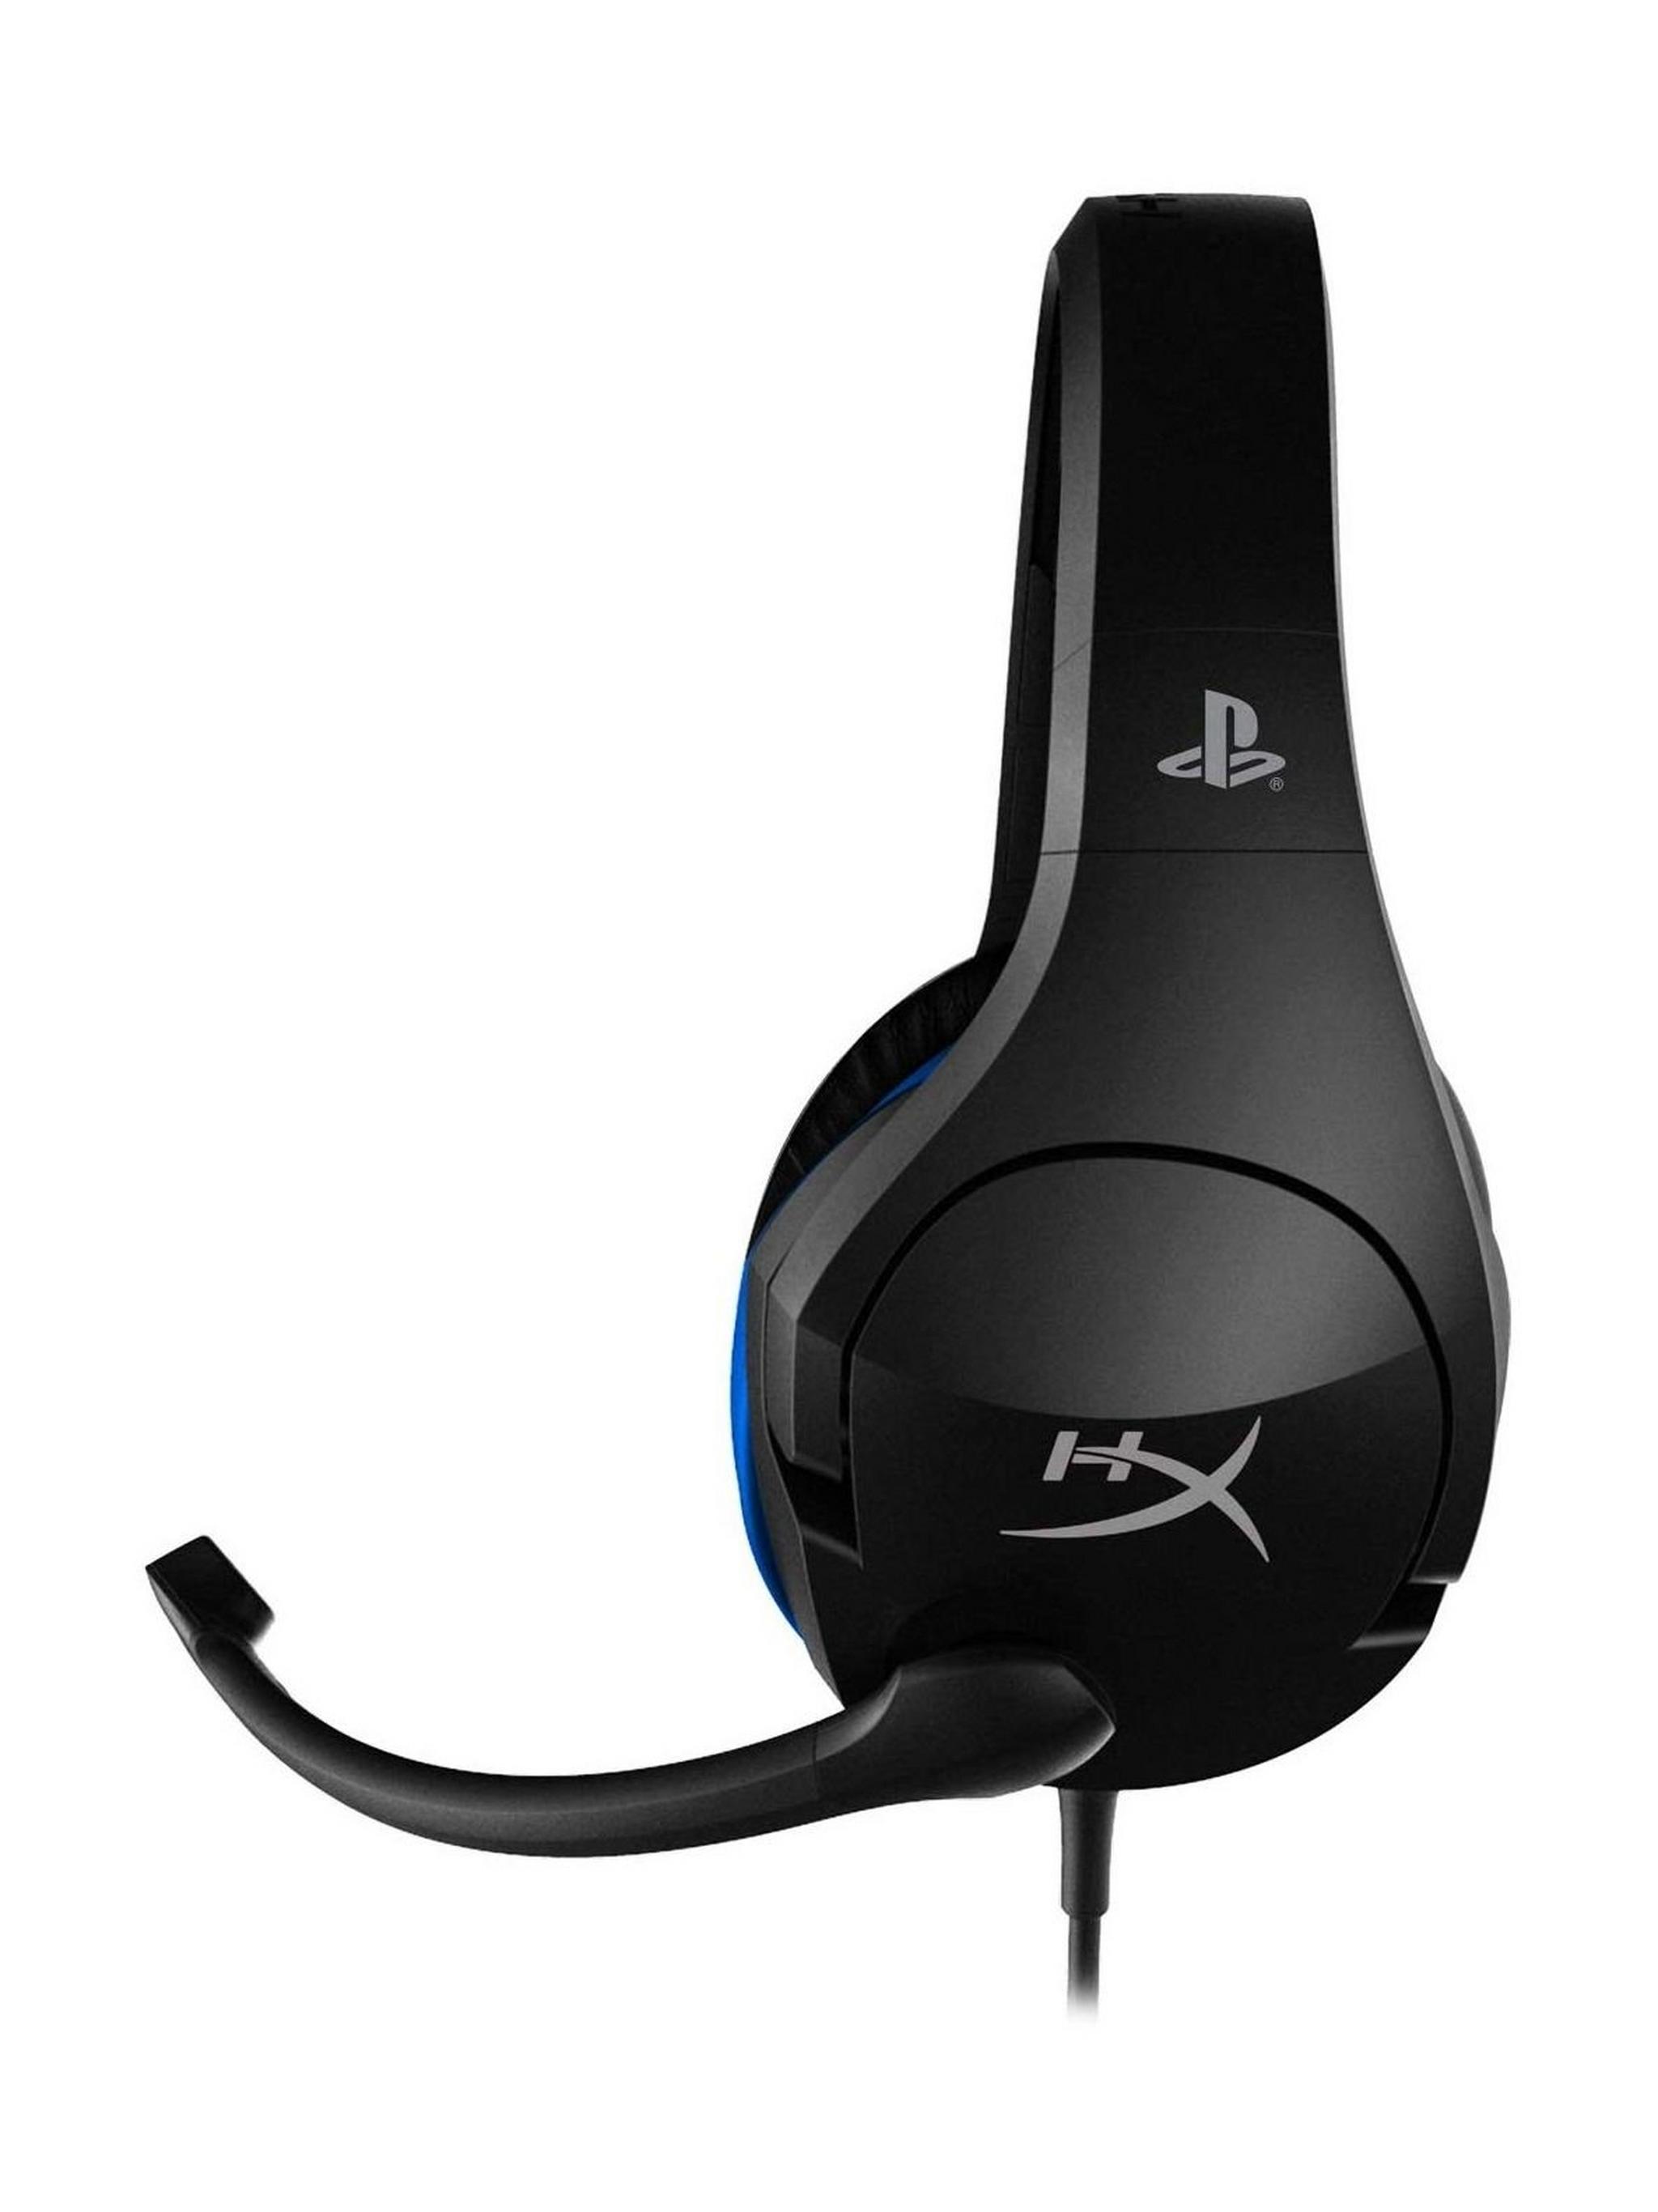 HyperX Cloud Stinger Wired Gaming Headphone For PlayStation 4